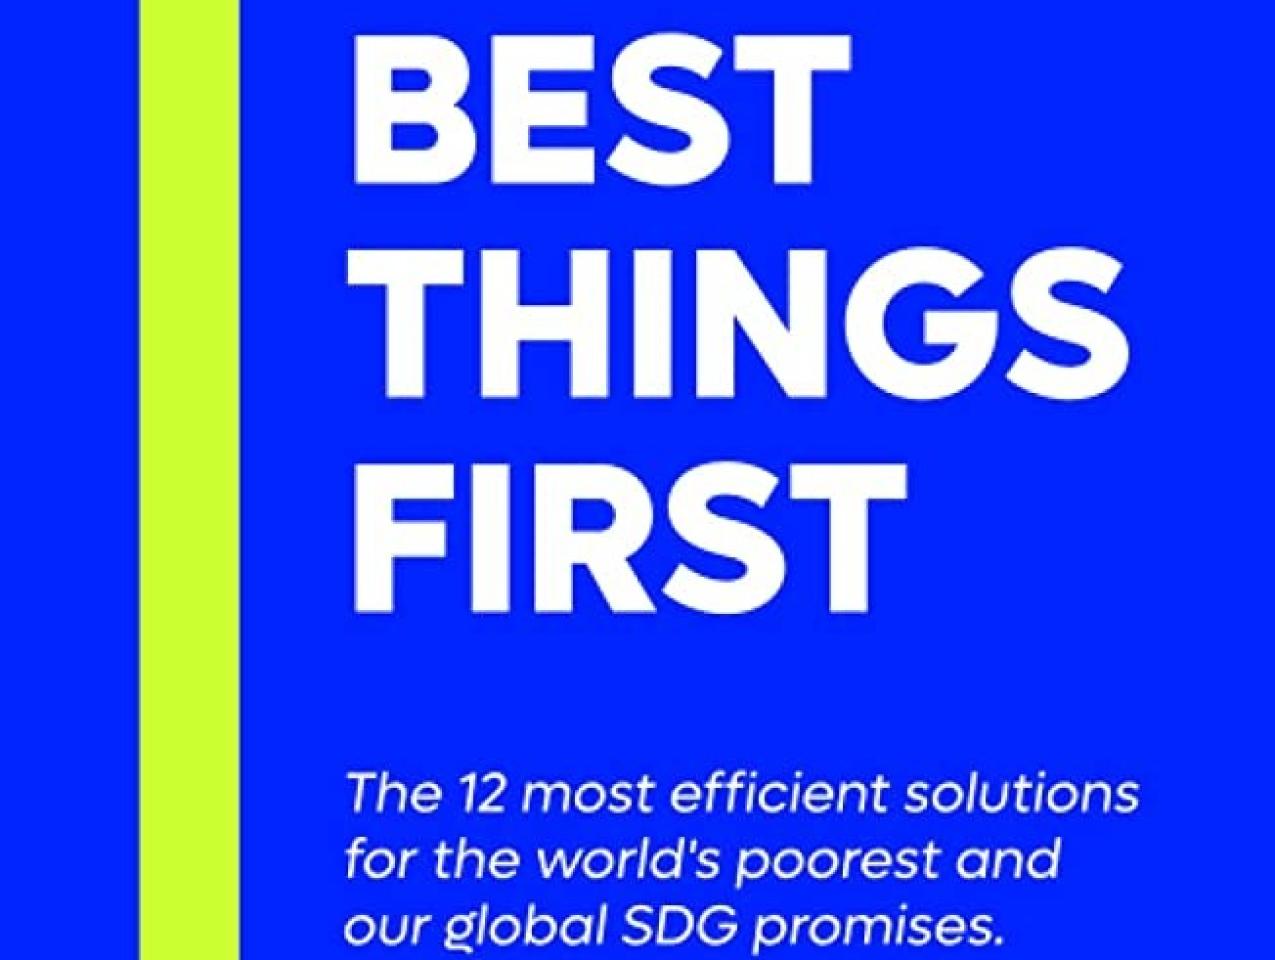 Best Things First: The 12 most efficient solutions for the world's